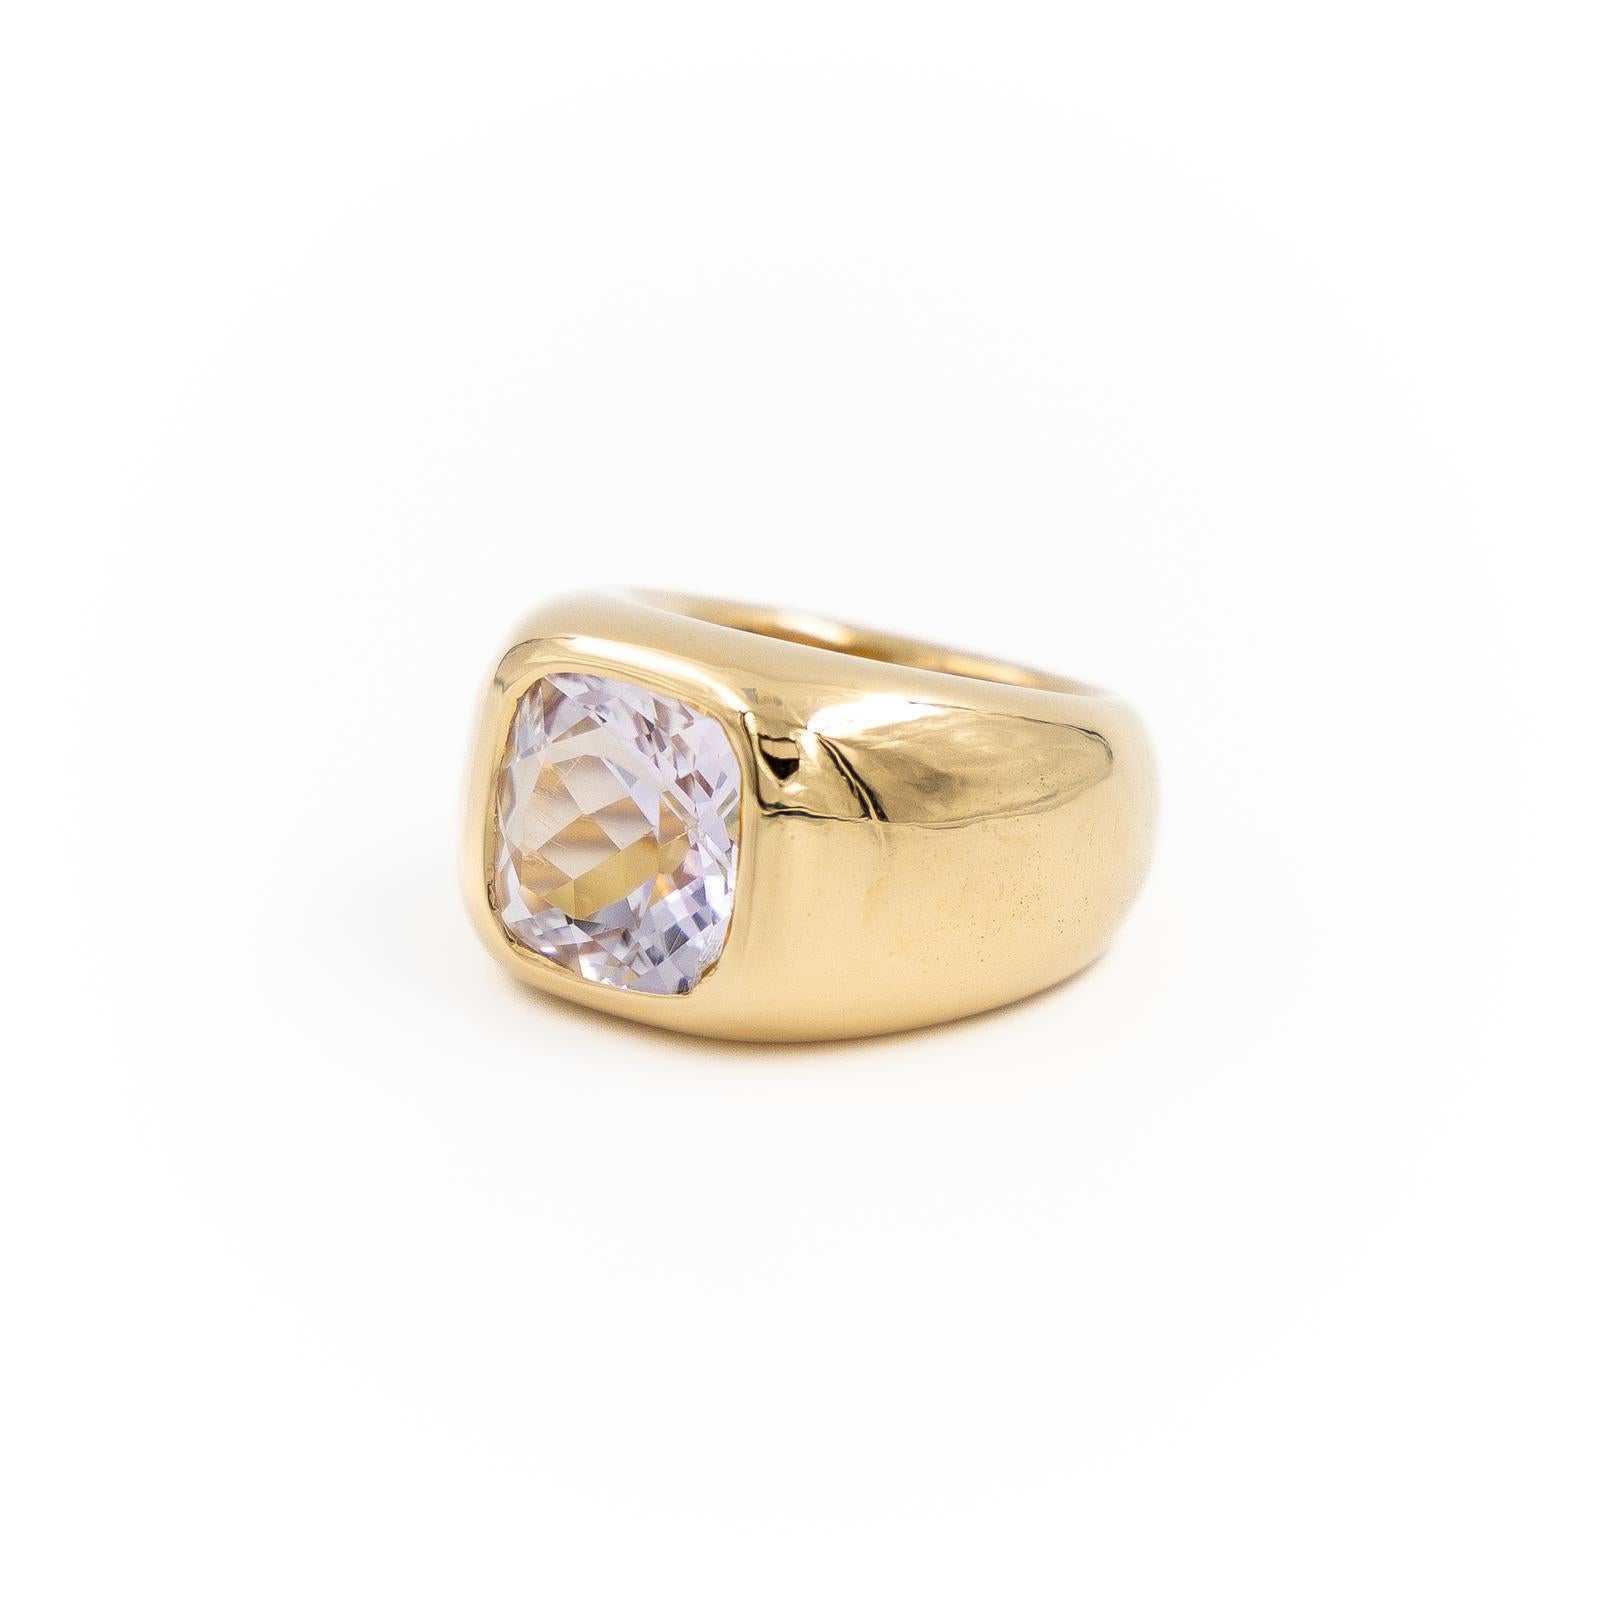 Ring in yellow gold 750 thousandths (18 carats). set with a cushion-cut amethyst. about 6.10 cts. width on the top: 1.60 cm. finger size: 54. total weight: 28.31 g. eagle head hallmark. excellent condition